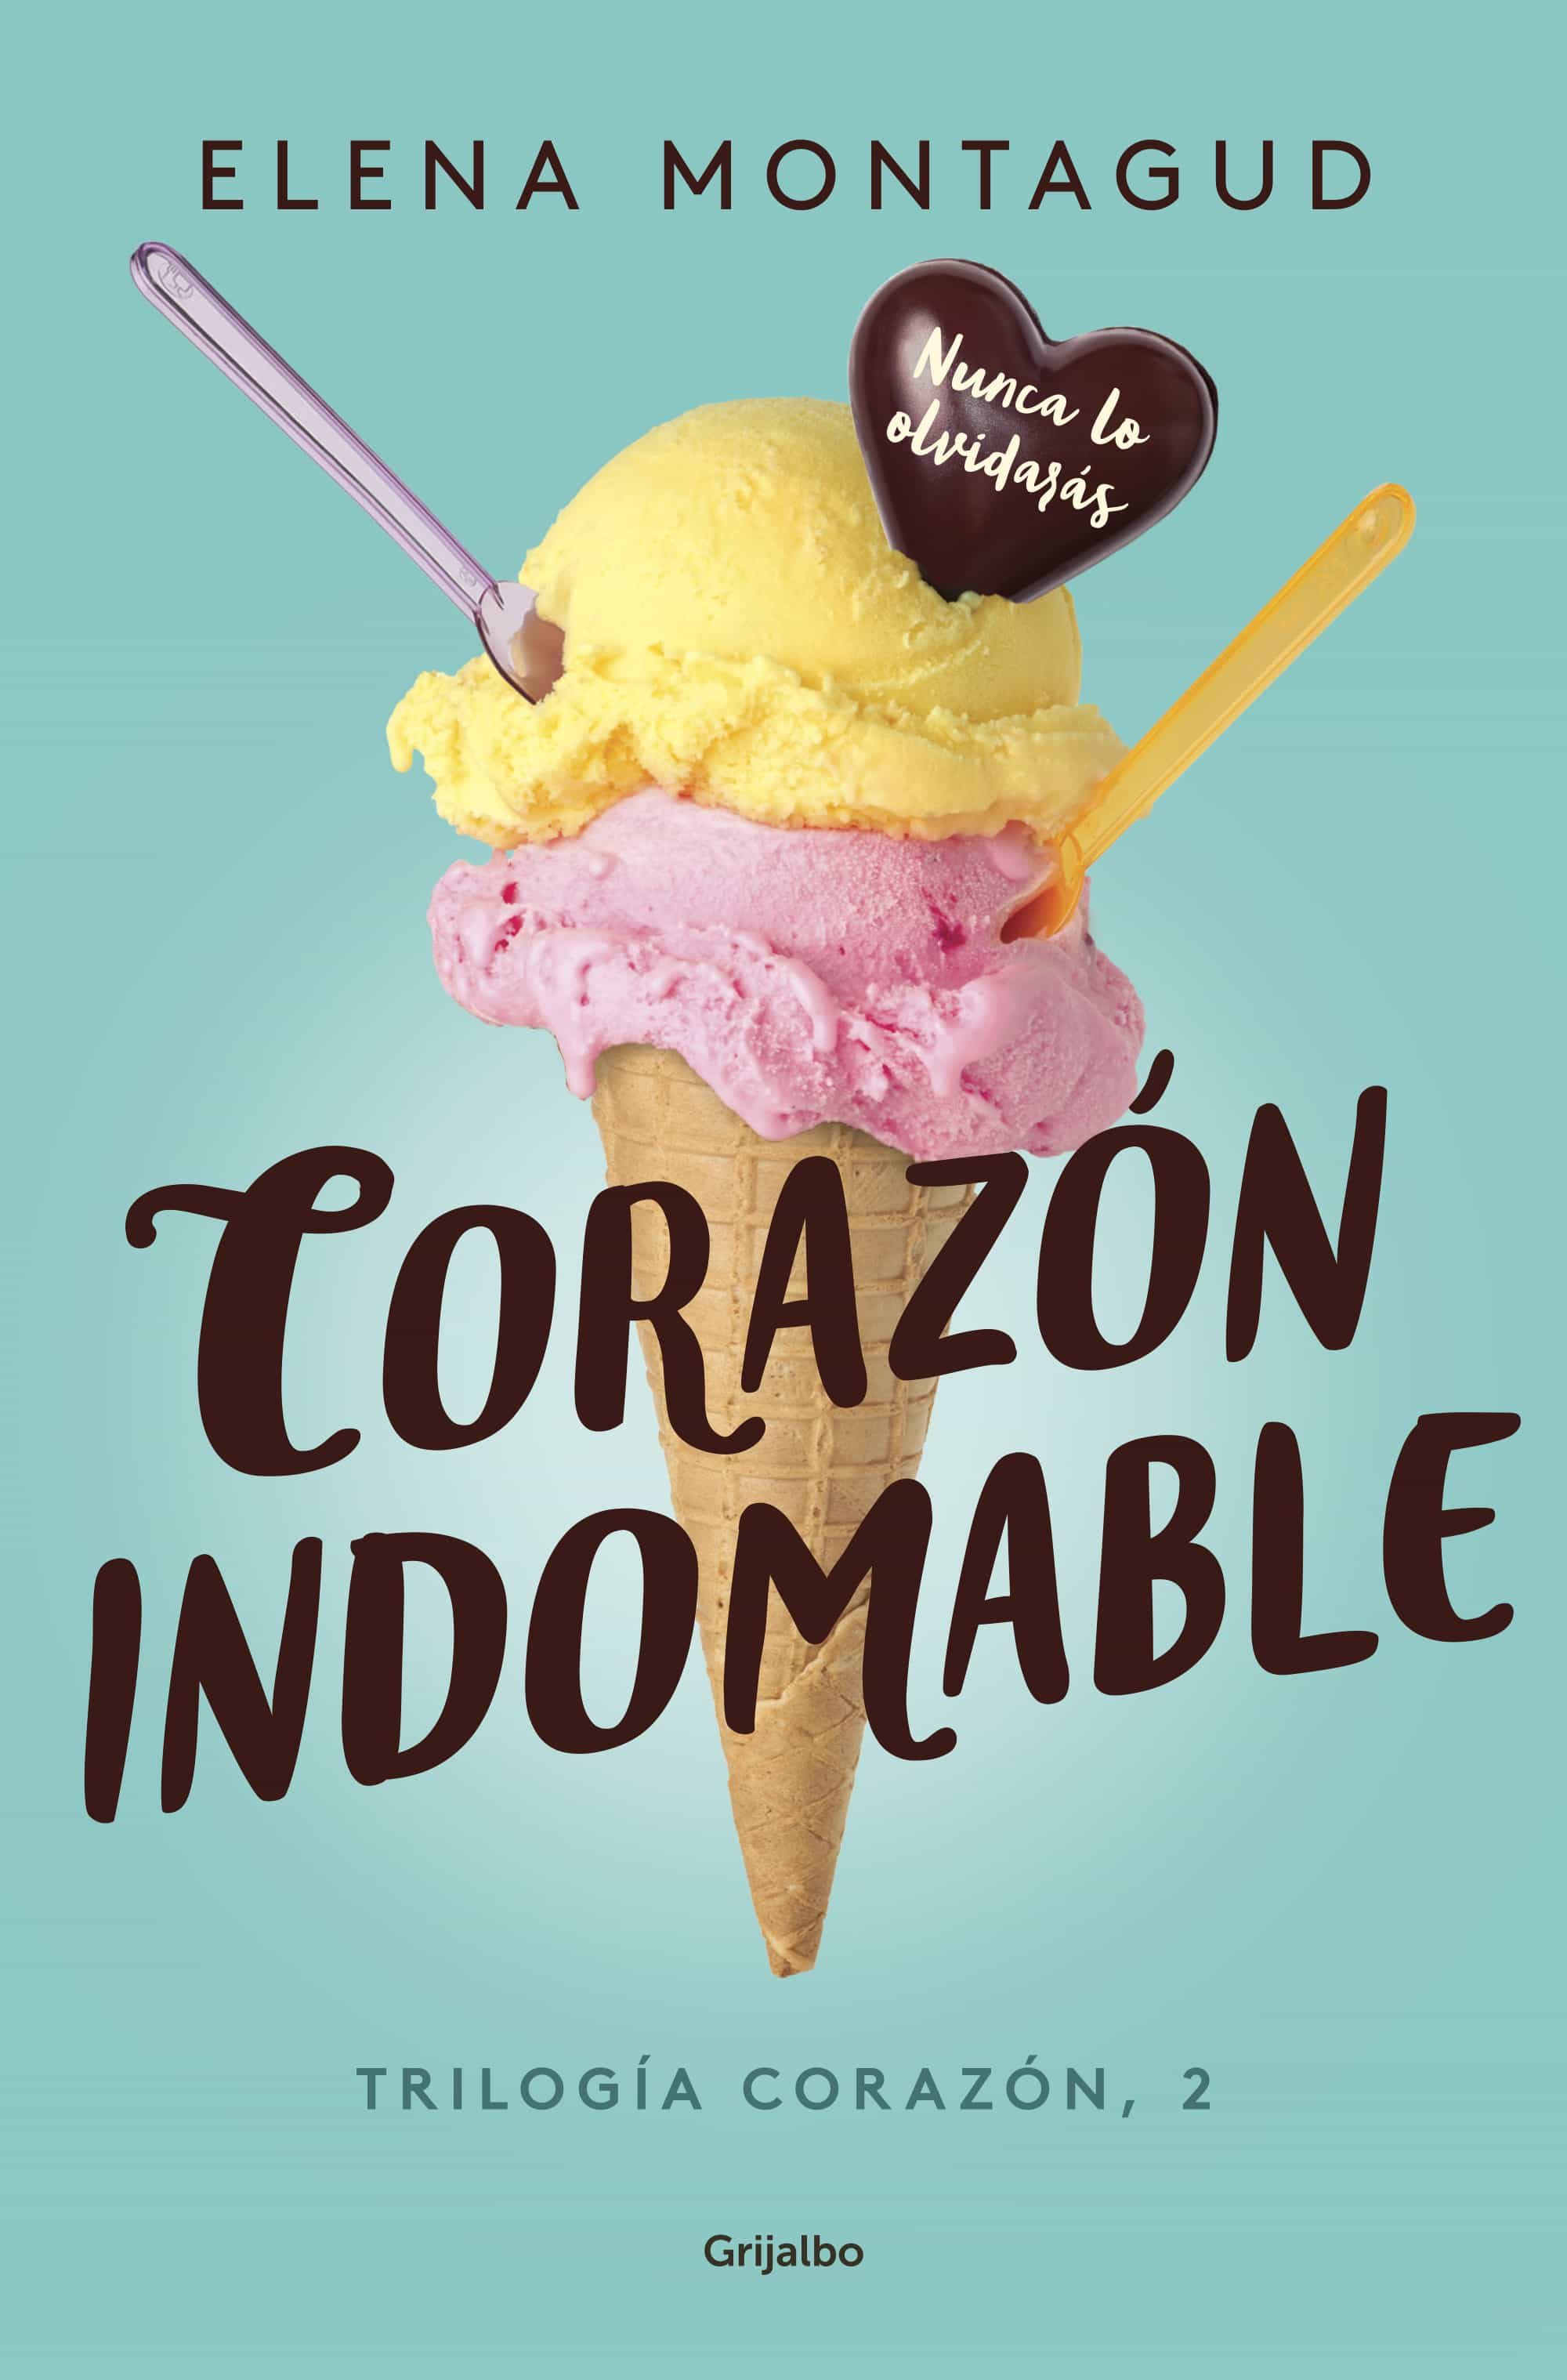 Ver Corazon Indomable Capitulos Completos